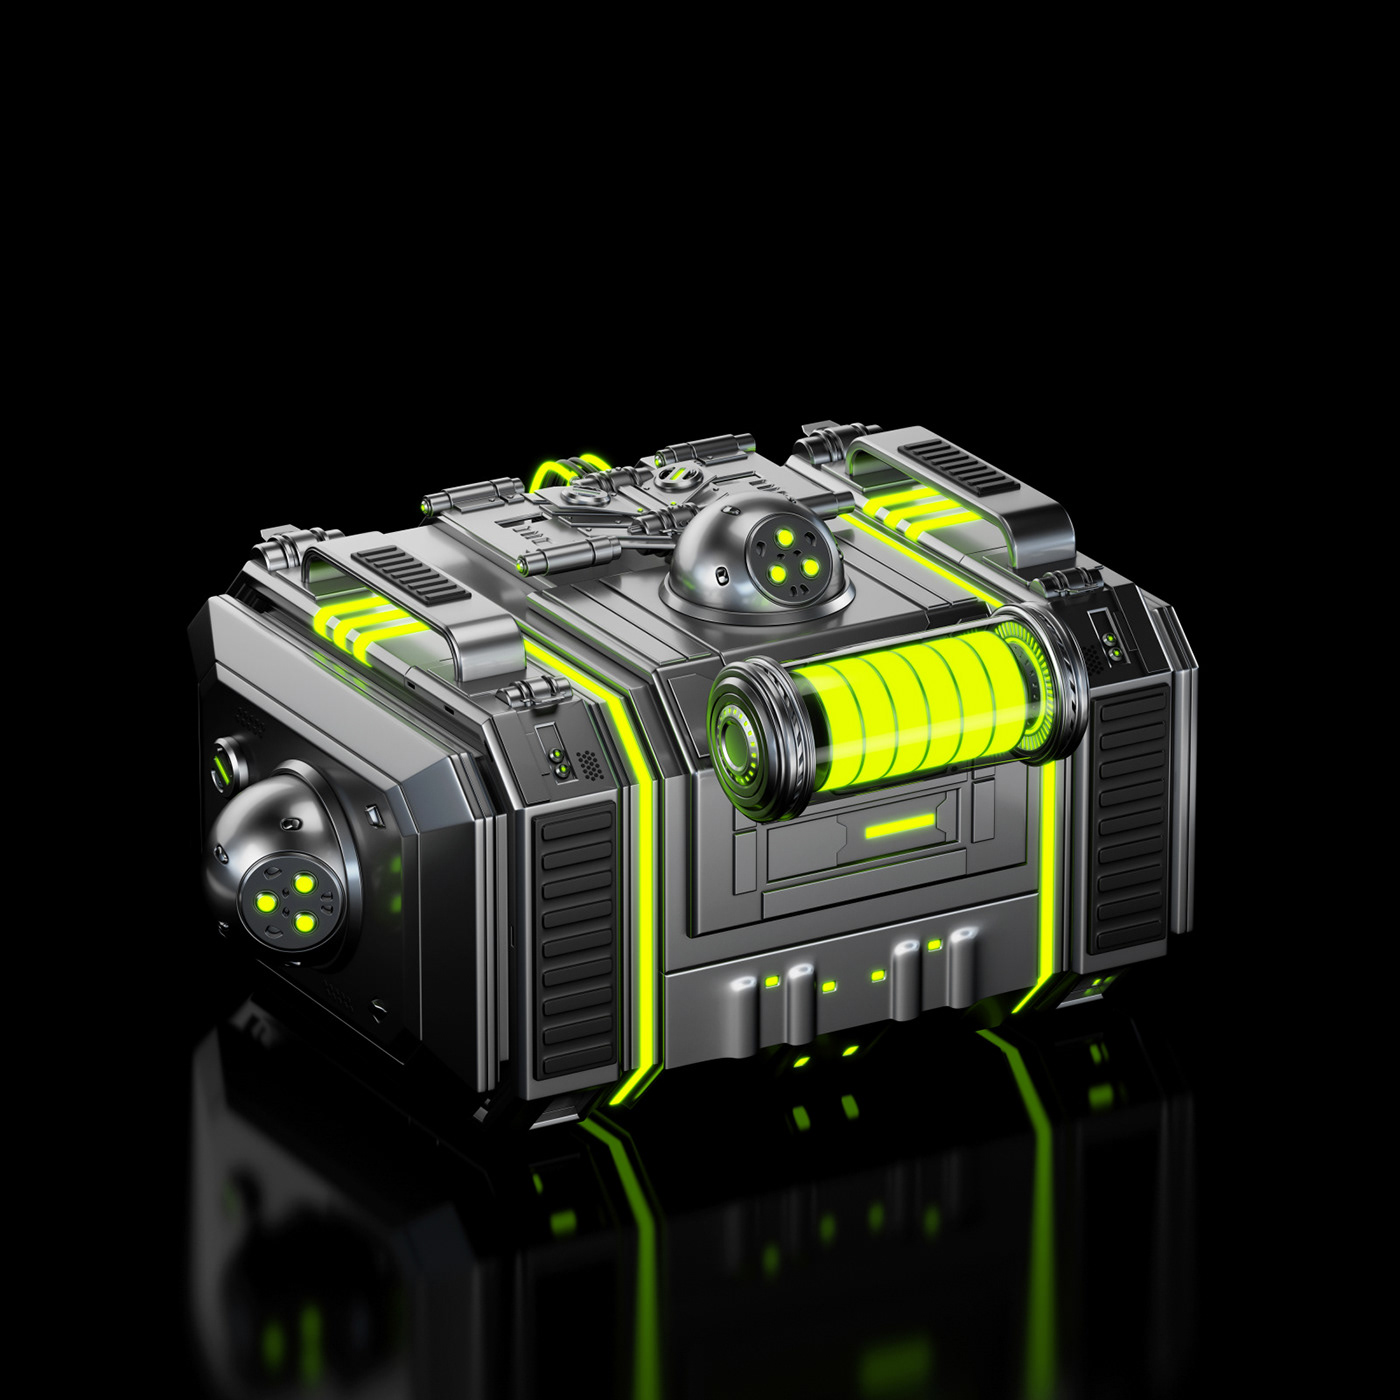 box crate asset game Scifi container package robotic battlepack weapon box